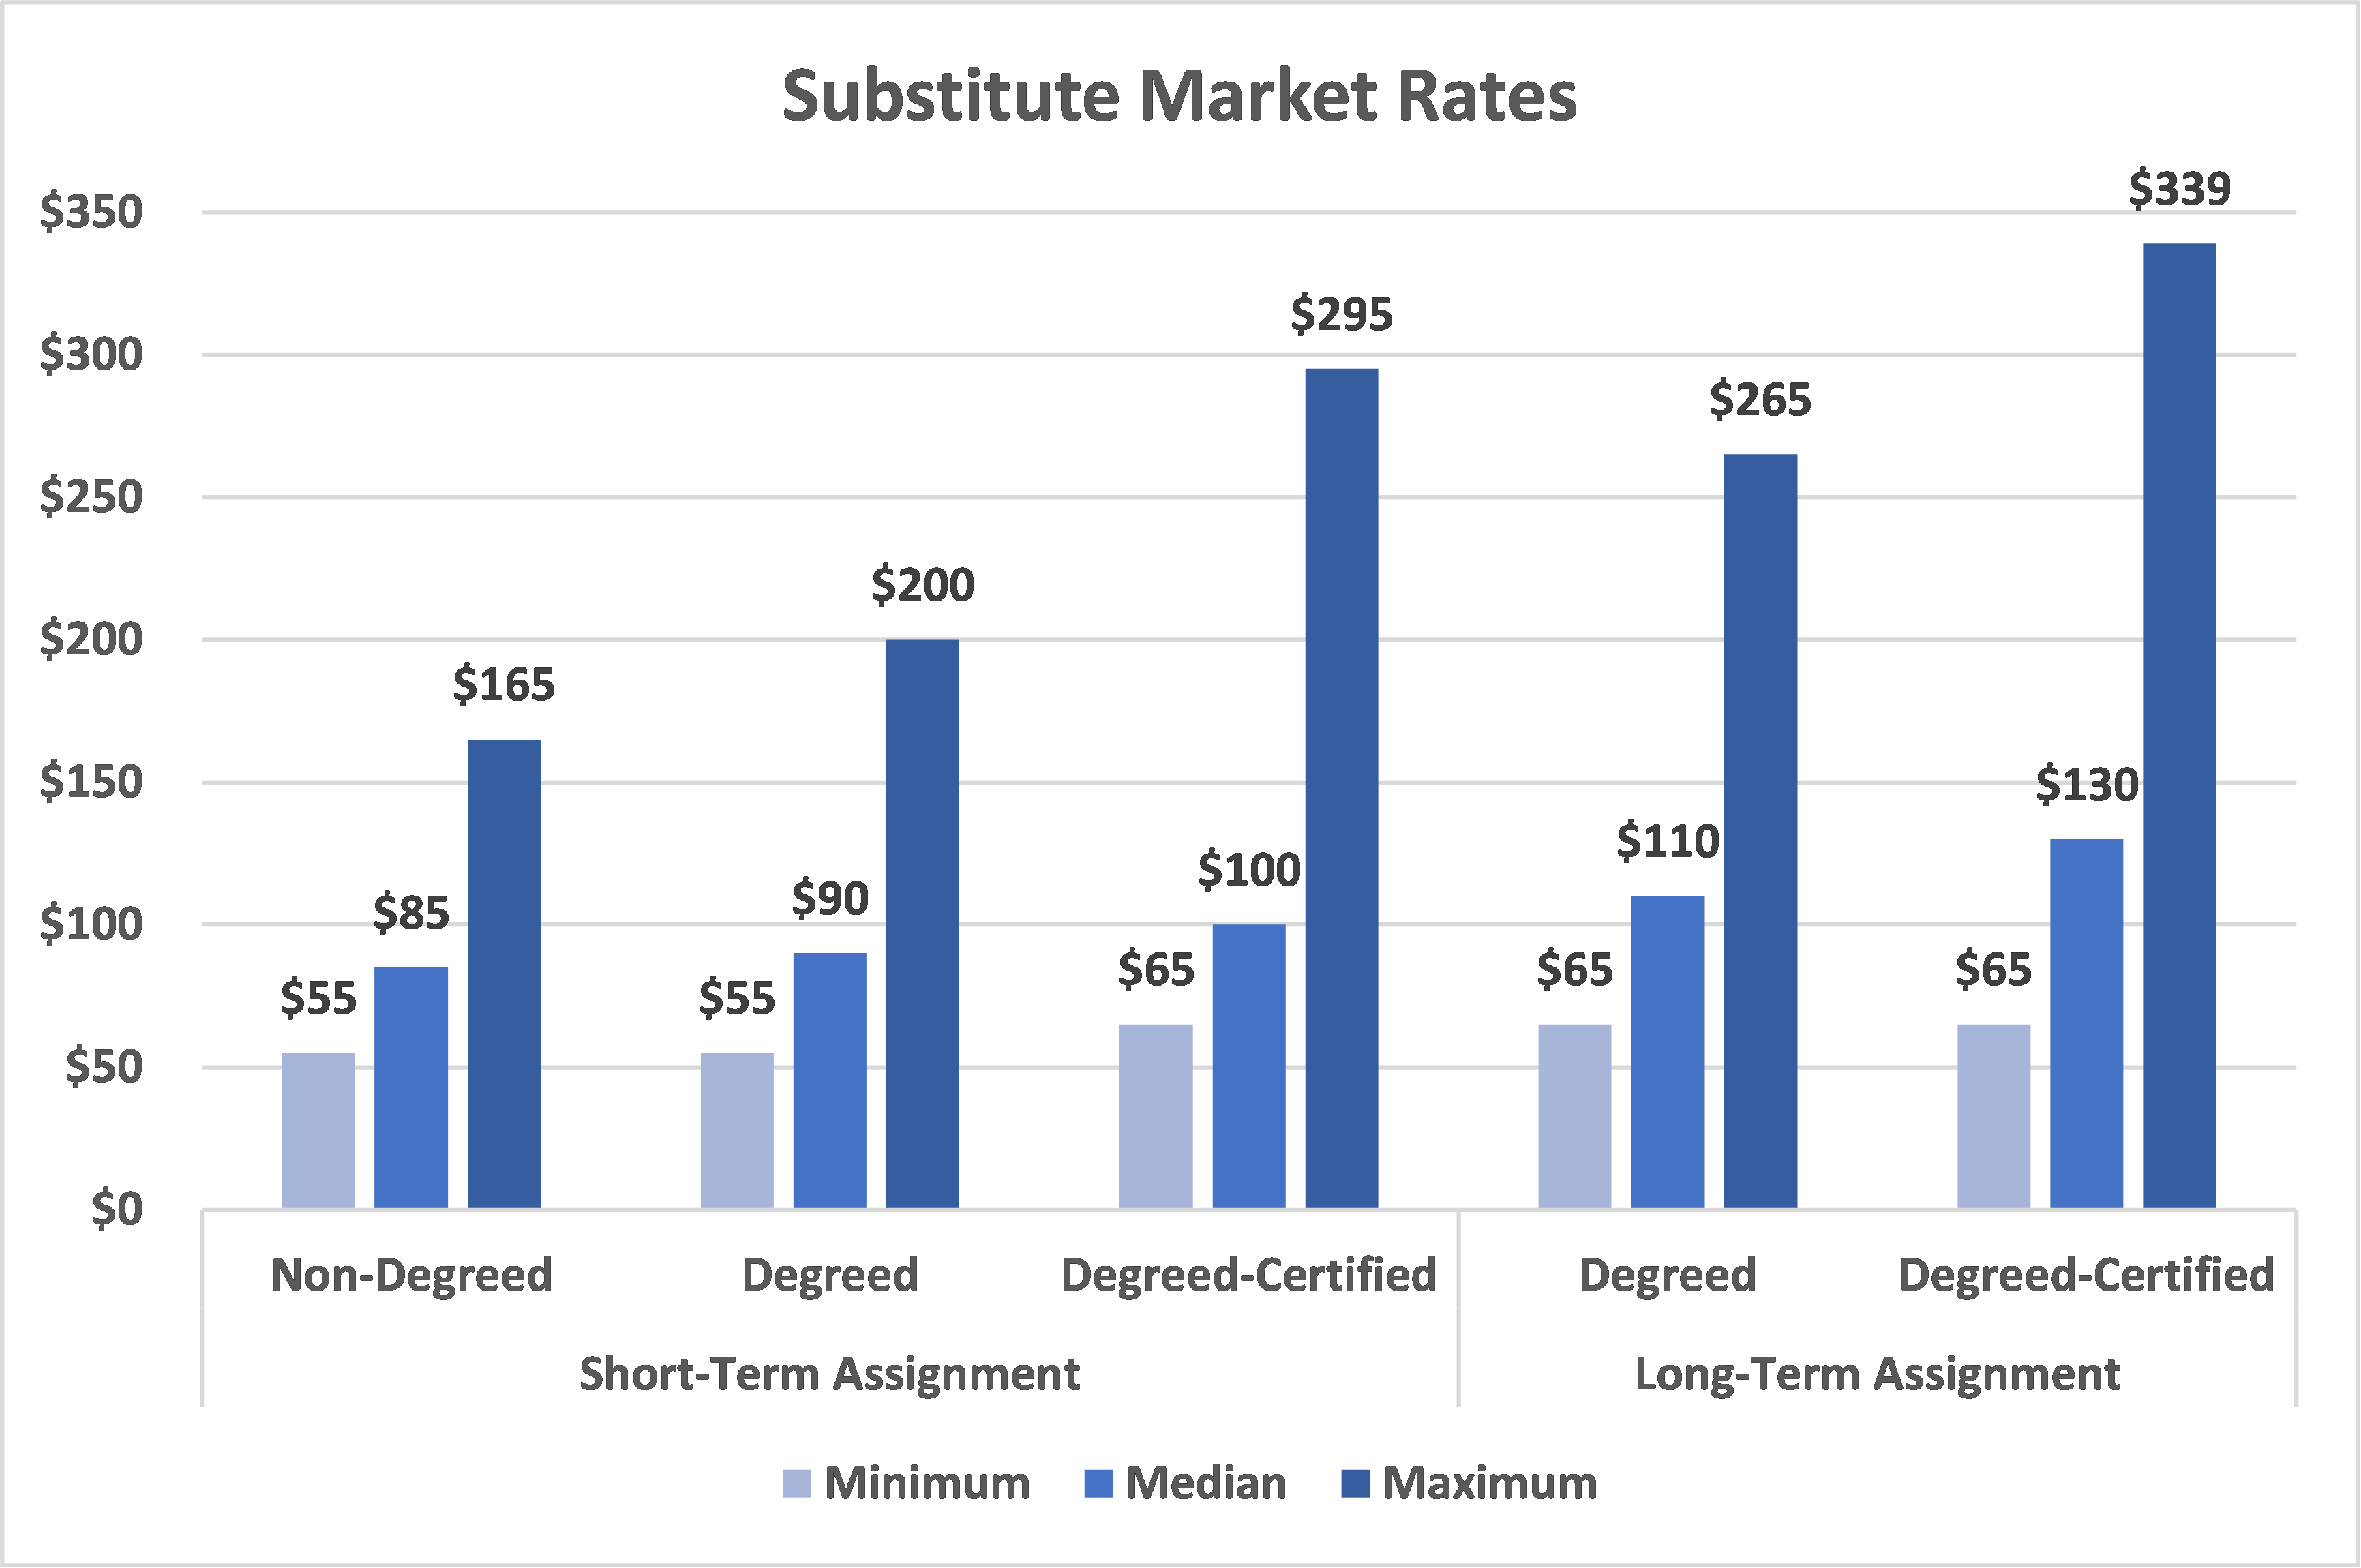 Chart showing substitute market rates for different types of substitute teachers